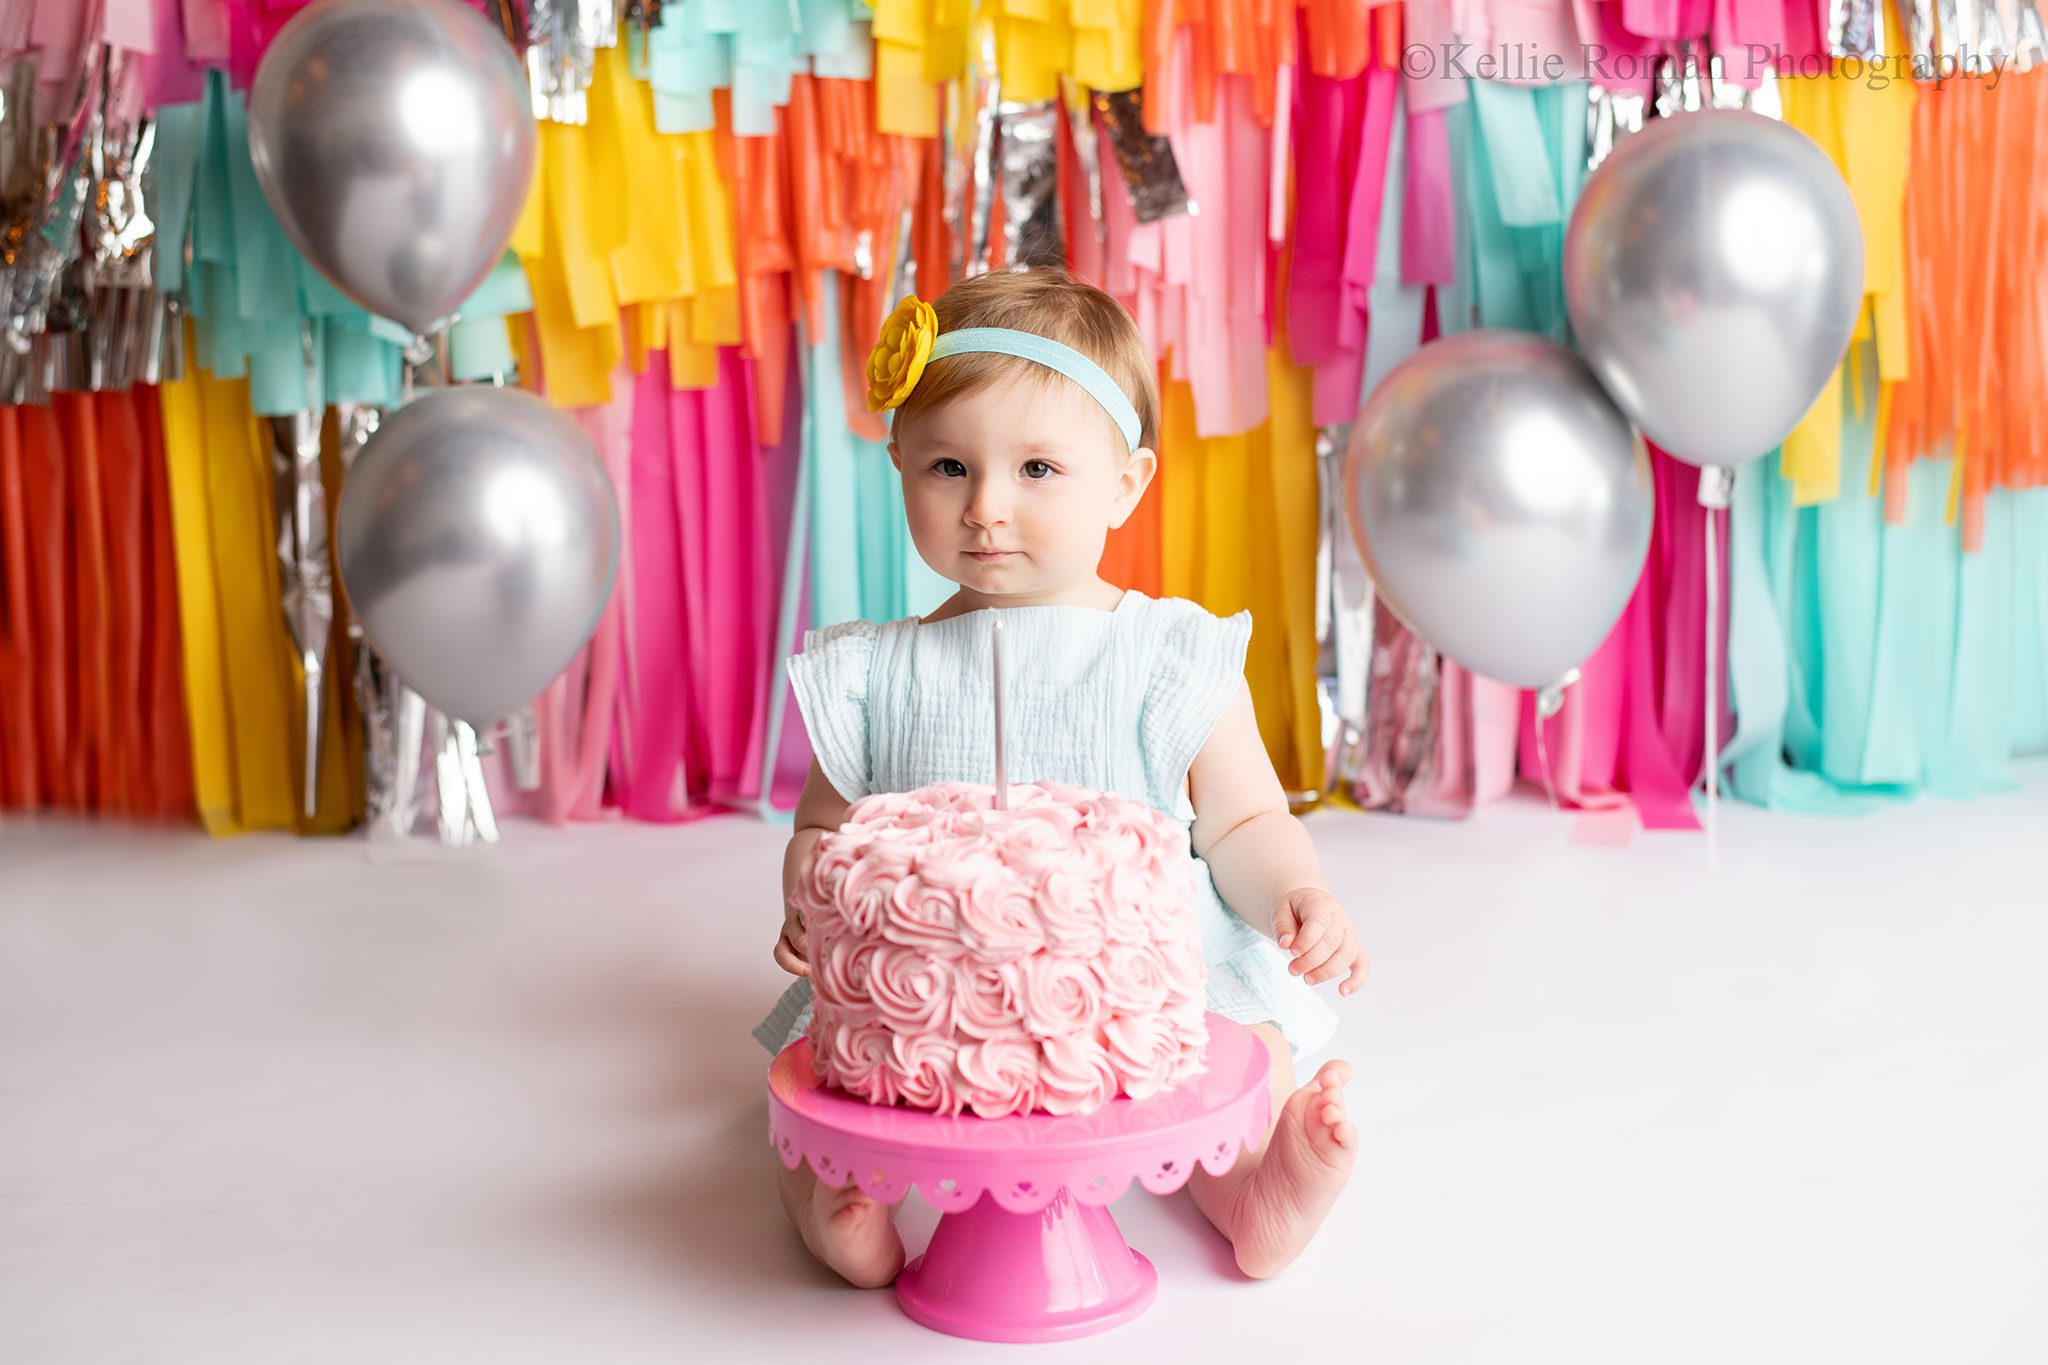 one year old girl is sitting behind pink cake sitting on dark pink cake stand. the backdrop is very brightly colored with shades of yellow, pink, orange, teal and silver. girl is very serious and isn't smiling
